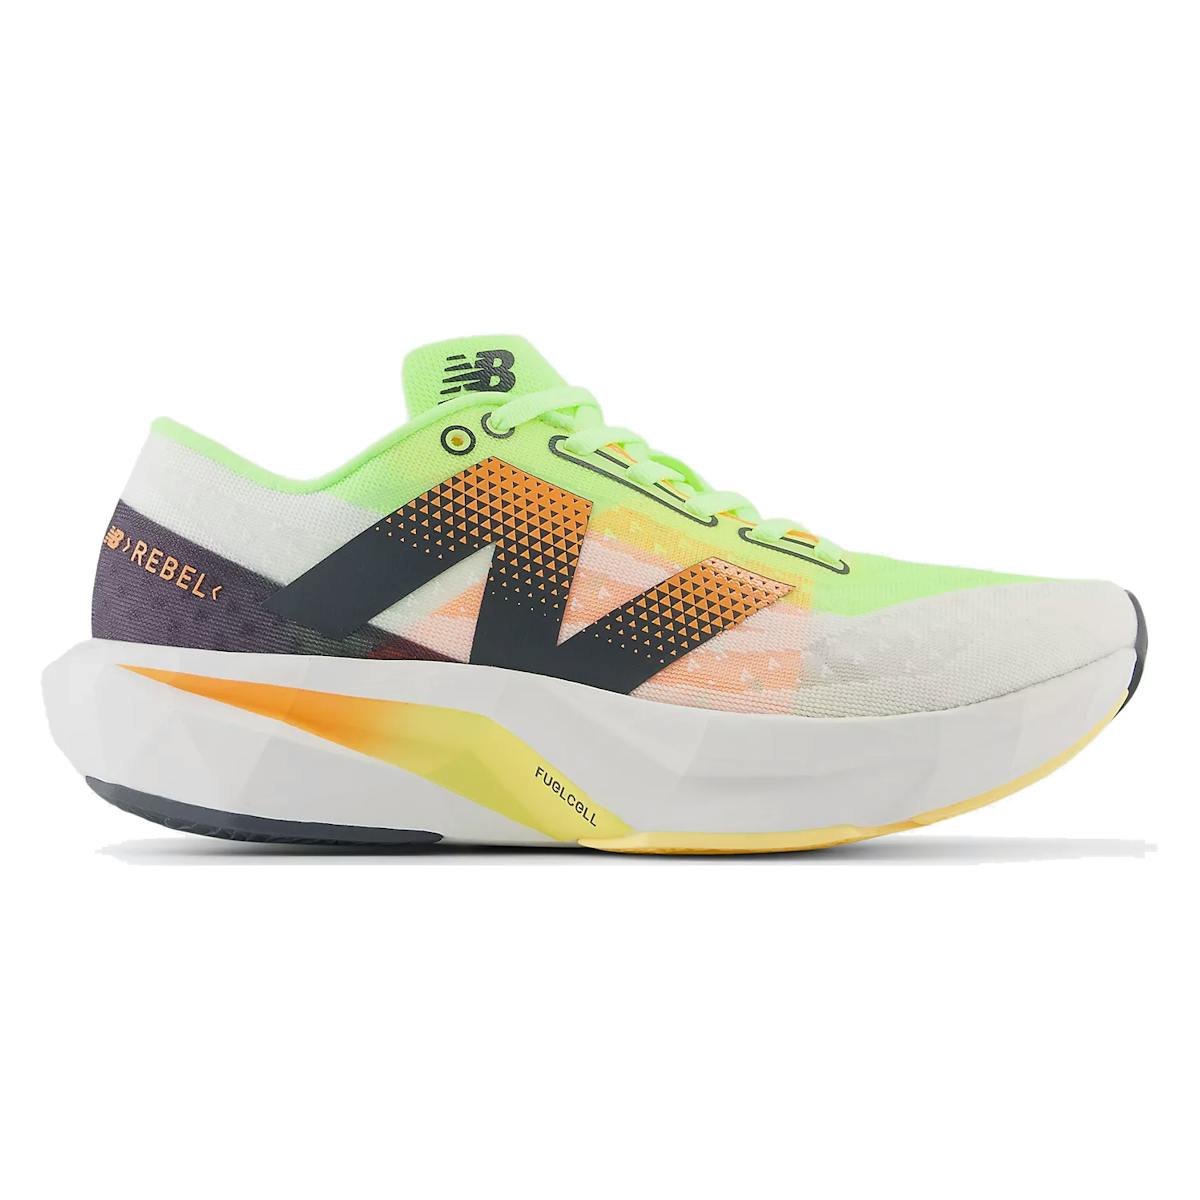 New Balance FuelCell Rebel v4 "Bleached Lime"